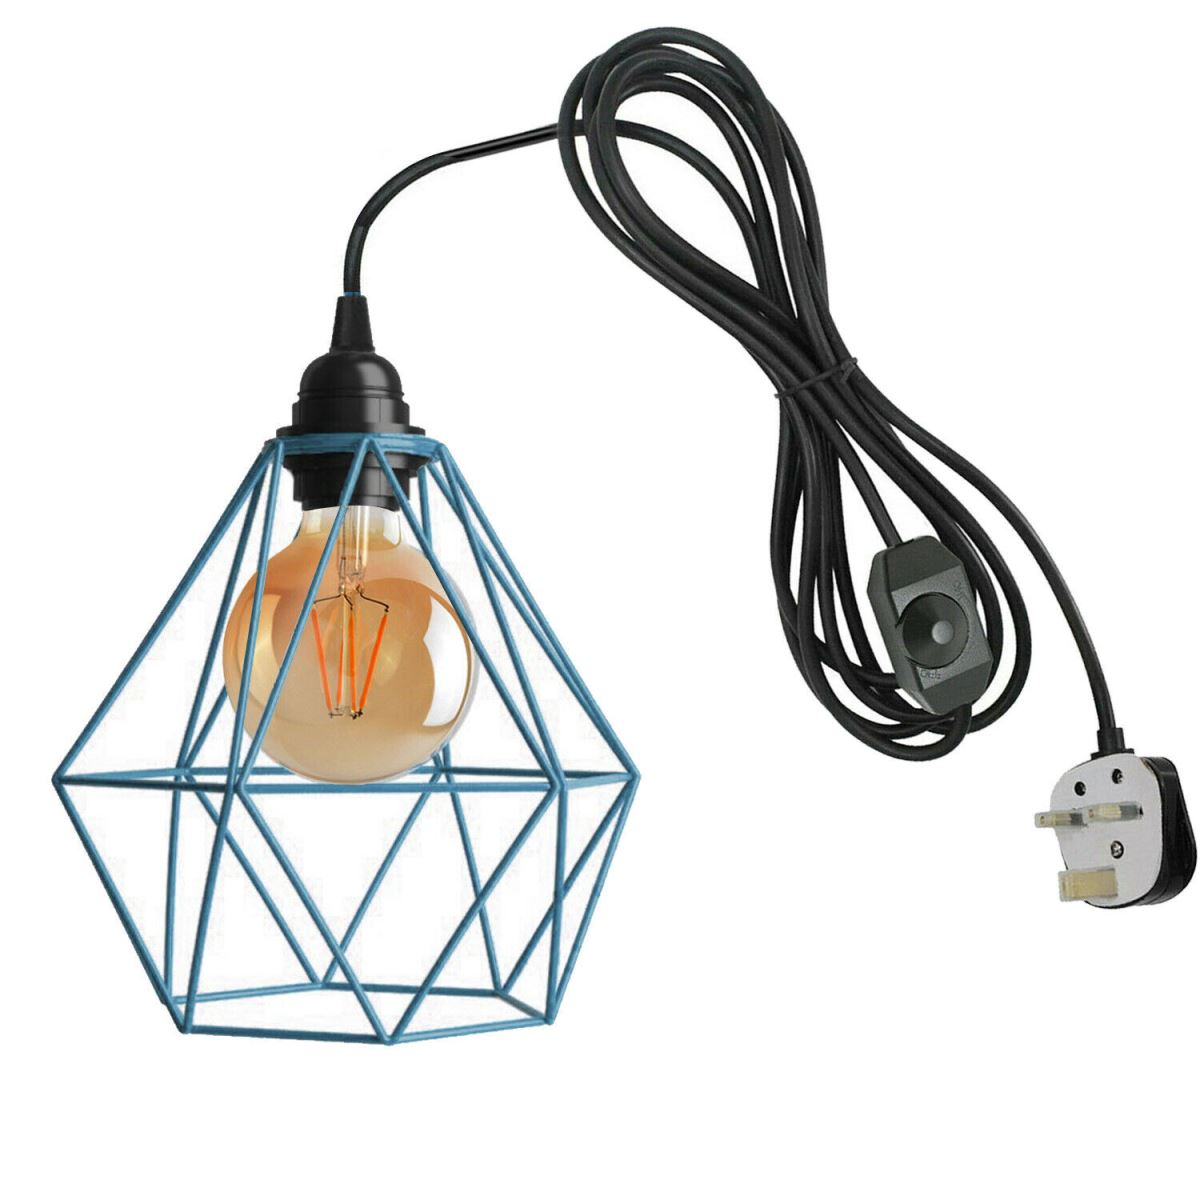 Blue Diamond Shade Dimmer Switch Plug In Hanging Pendant Lamp